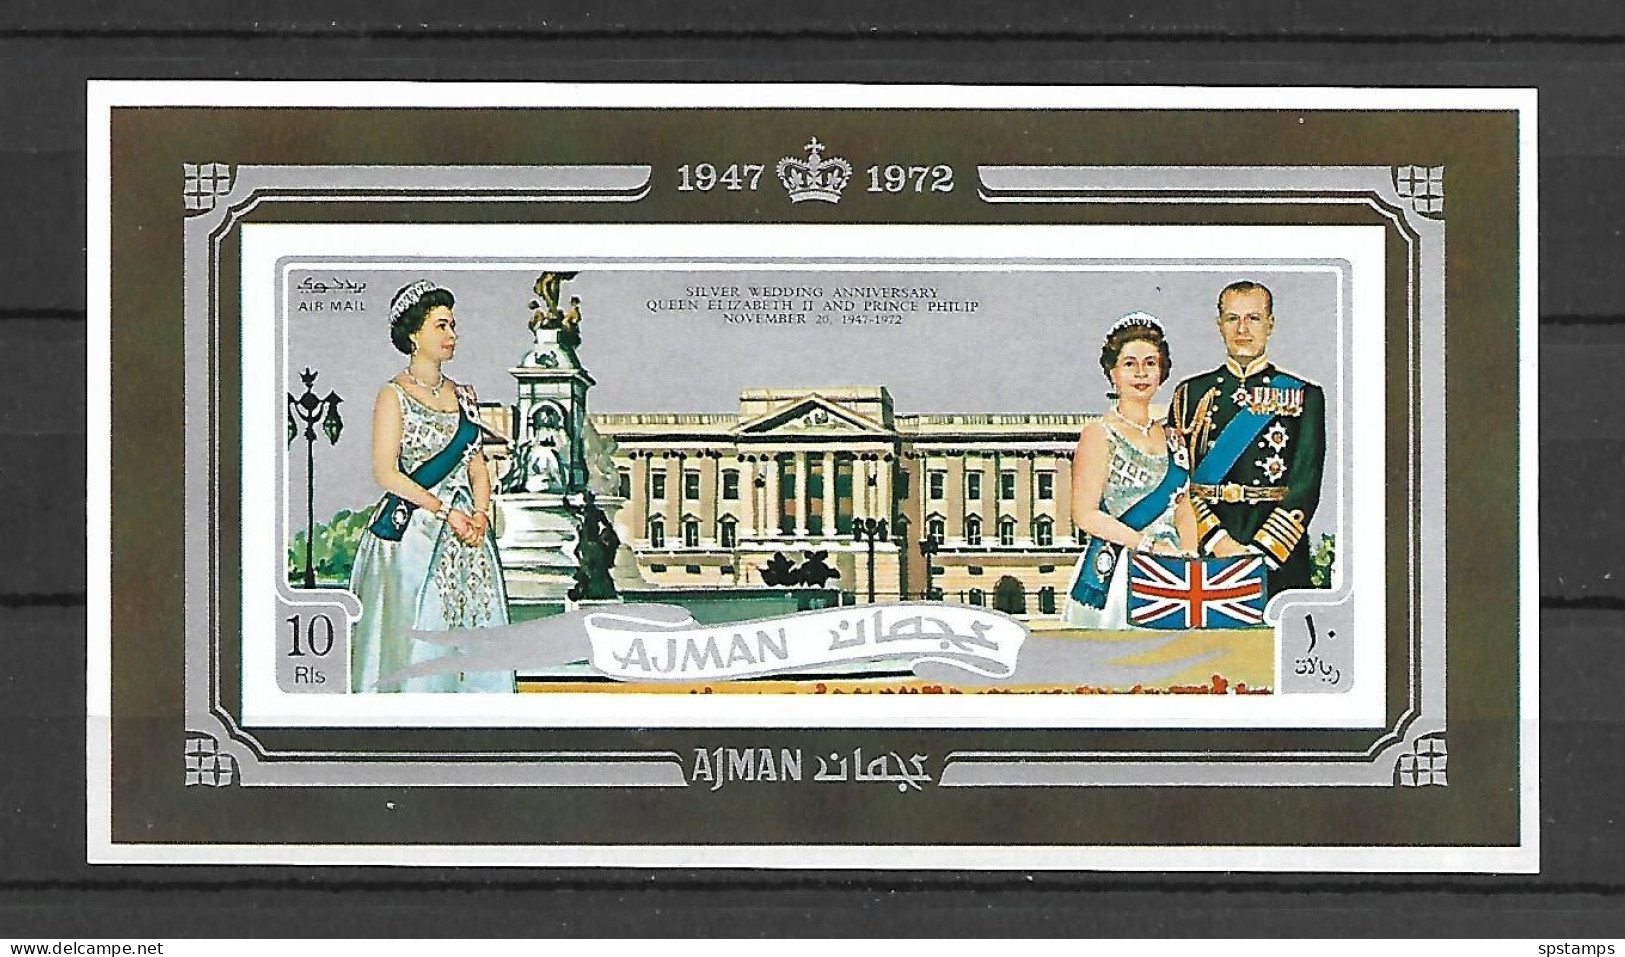 Ajman 1971 The 25th Wedding Anniversary Of Queen Elizabeth II And Prince Philip IMPERFORATE MS MNH - Ajman